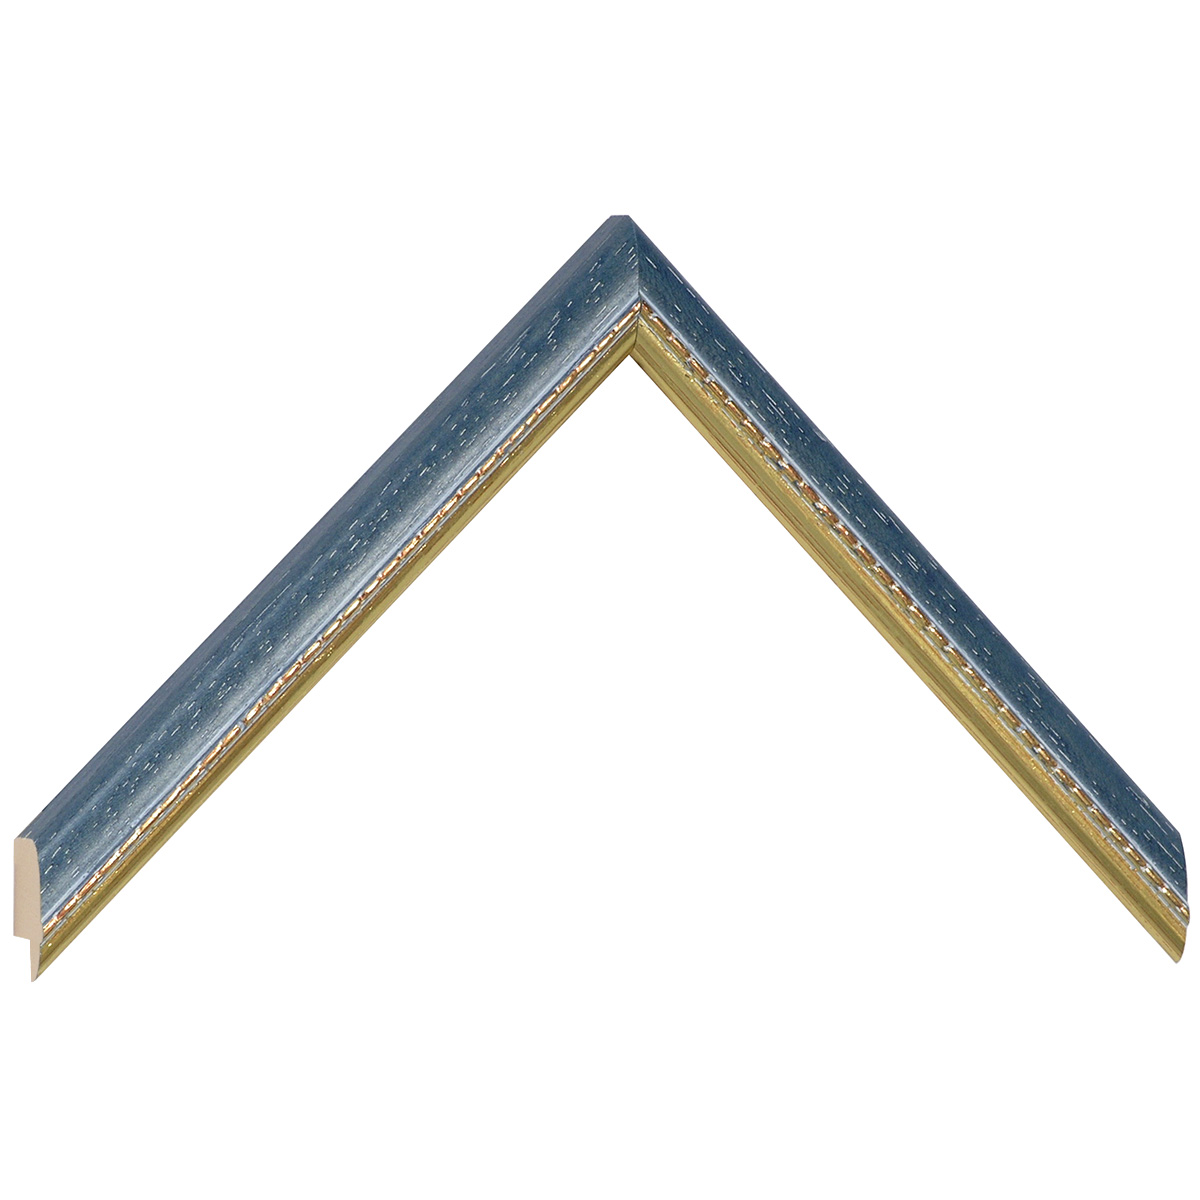 Moulding ayous 17mm - blue, gold decorative relief - Sample